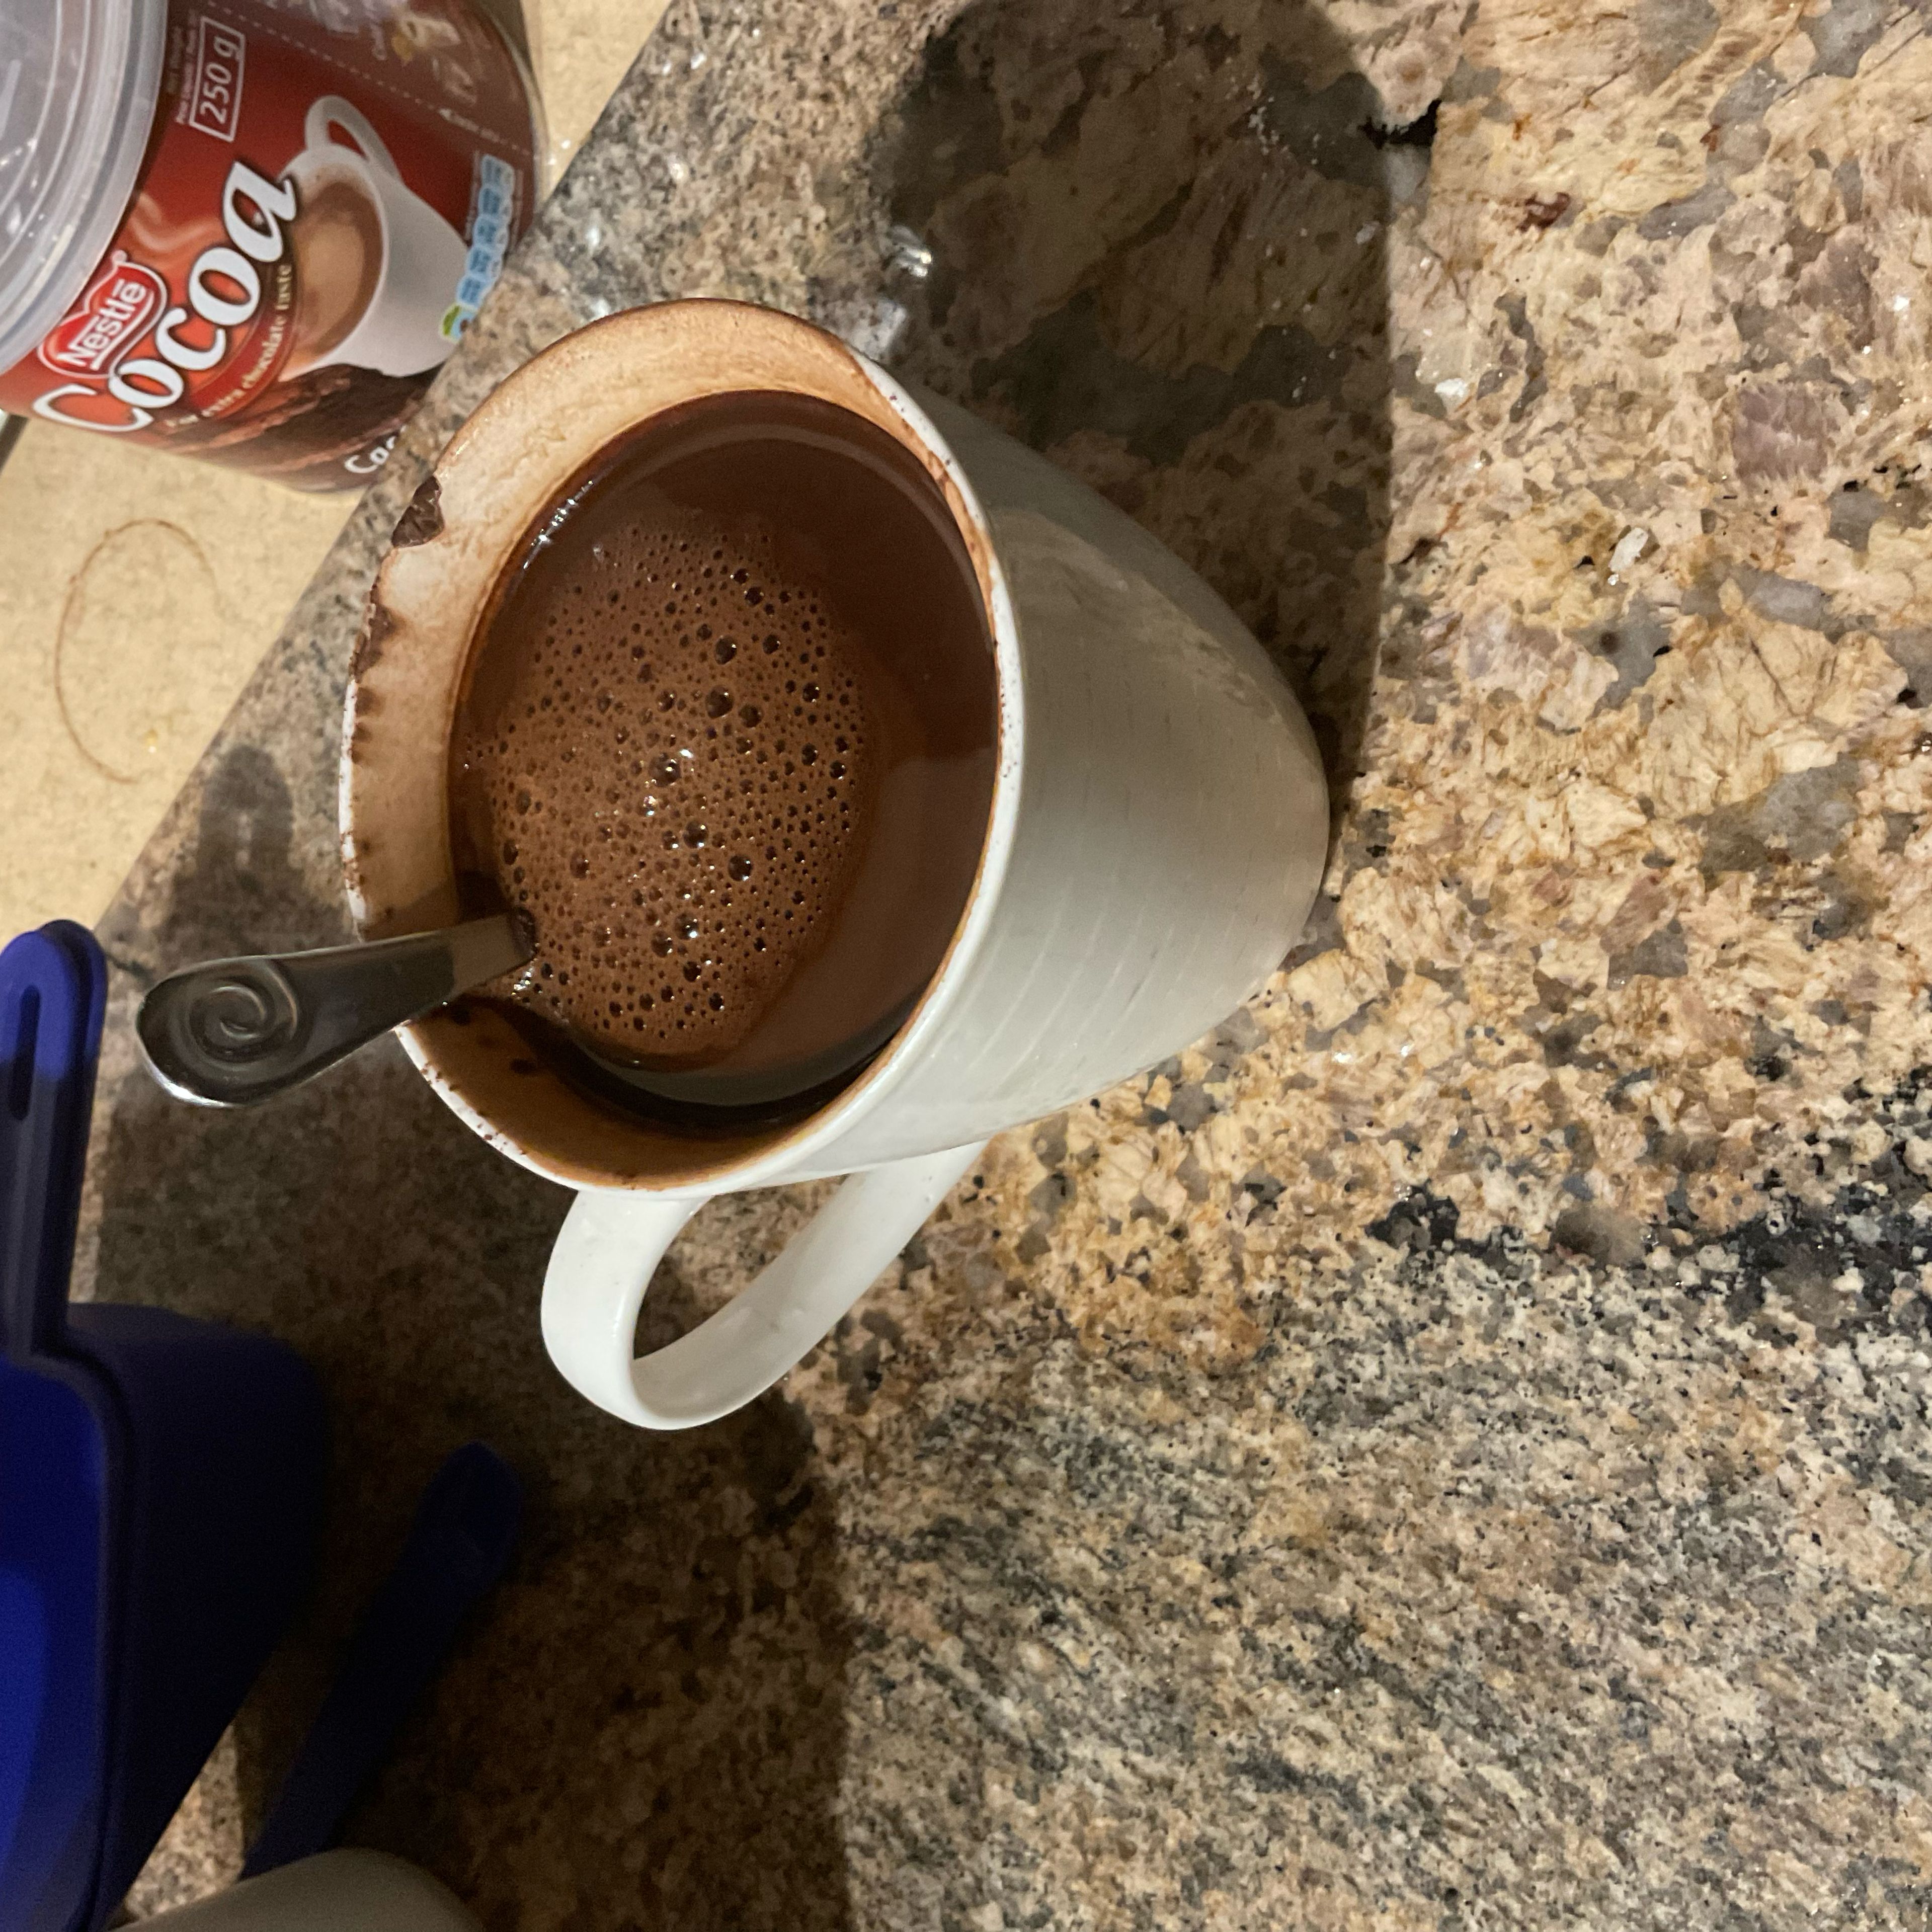 Add cocoa powder and coffee to a mug and add boiling water. Leave to cool.